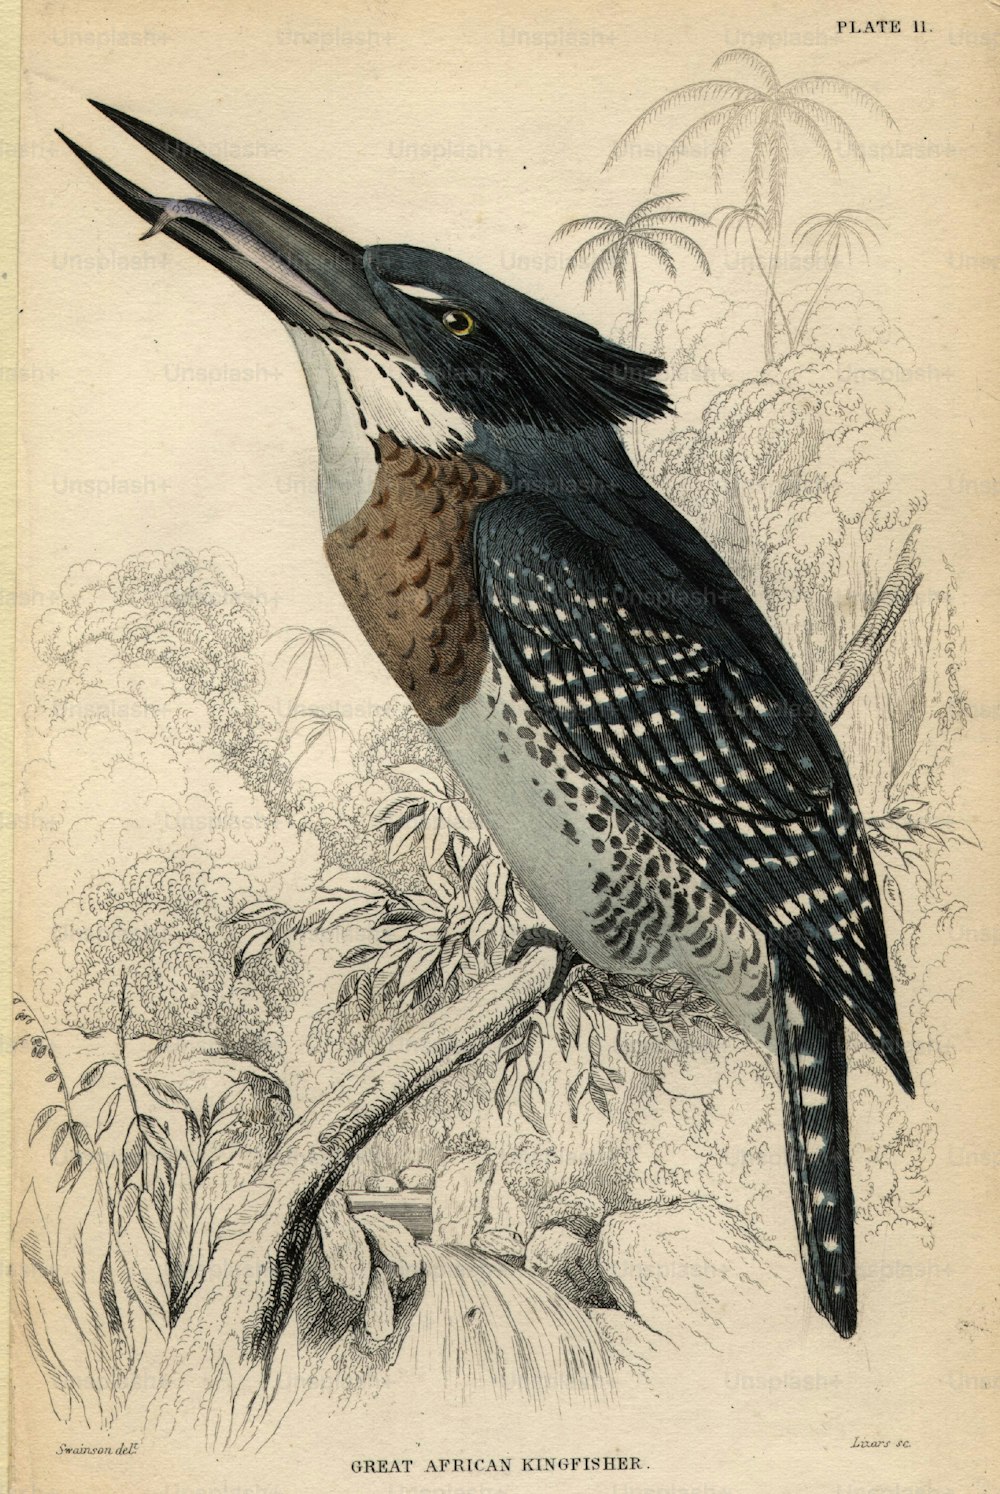 circa 1900:  The great African kingfisher.  (Photo by Hulton Archive/Getty Images)